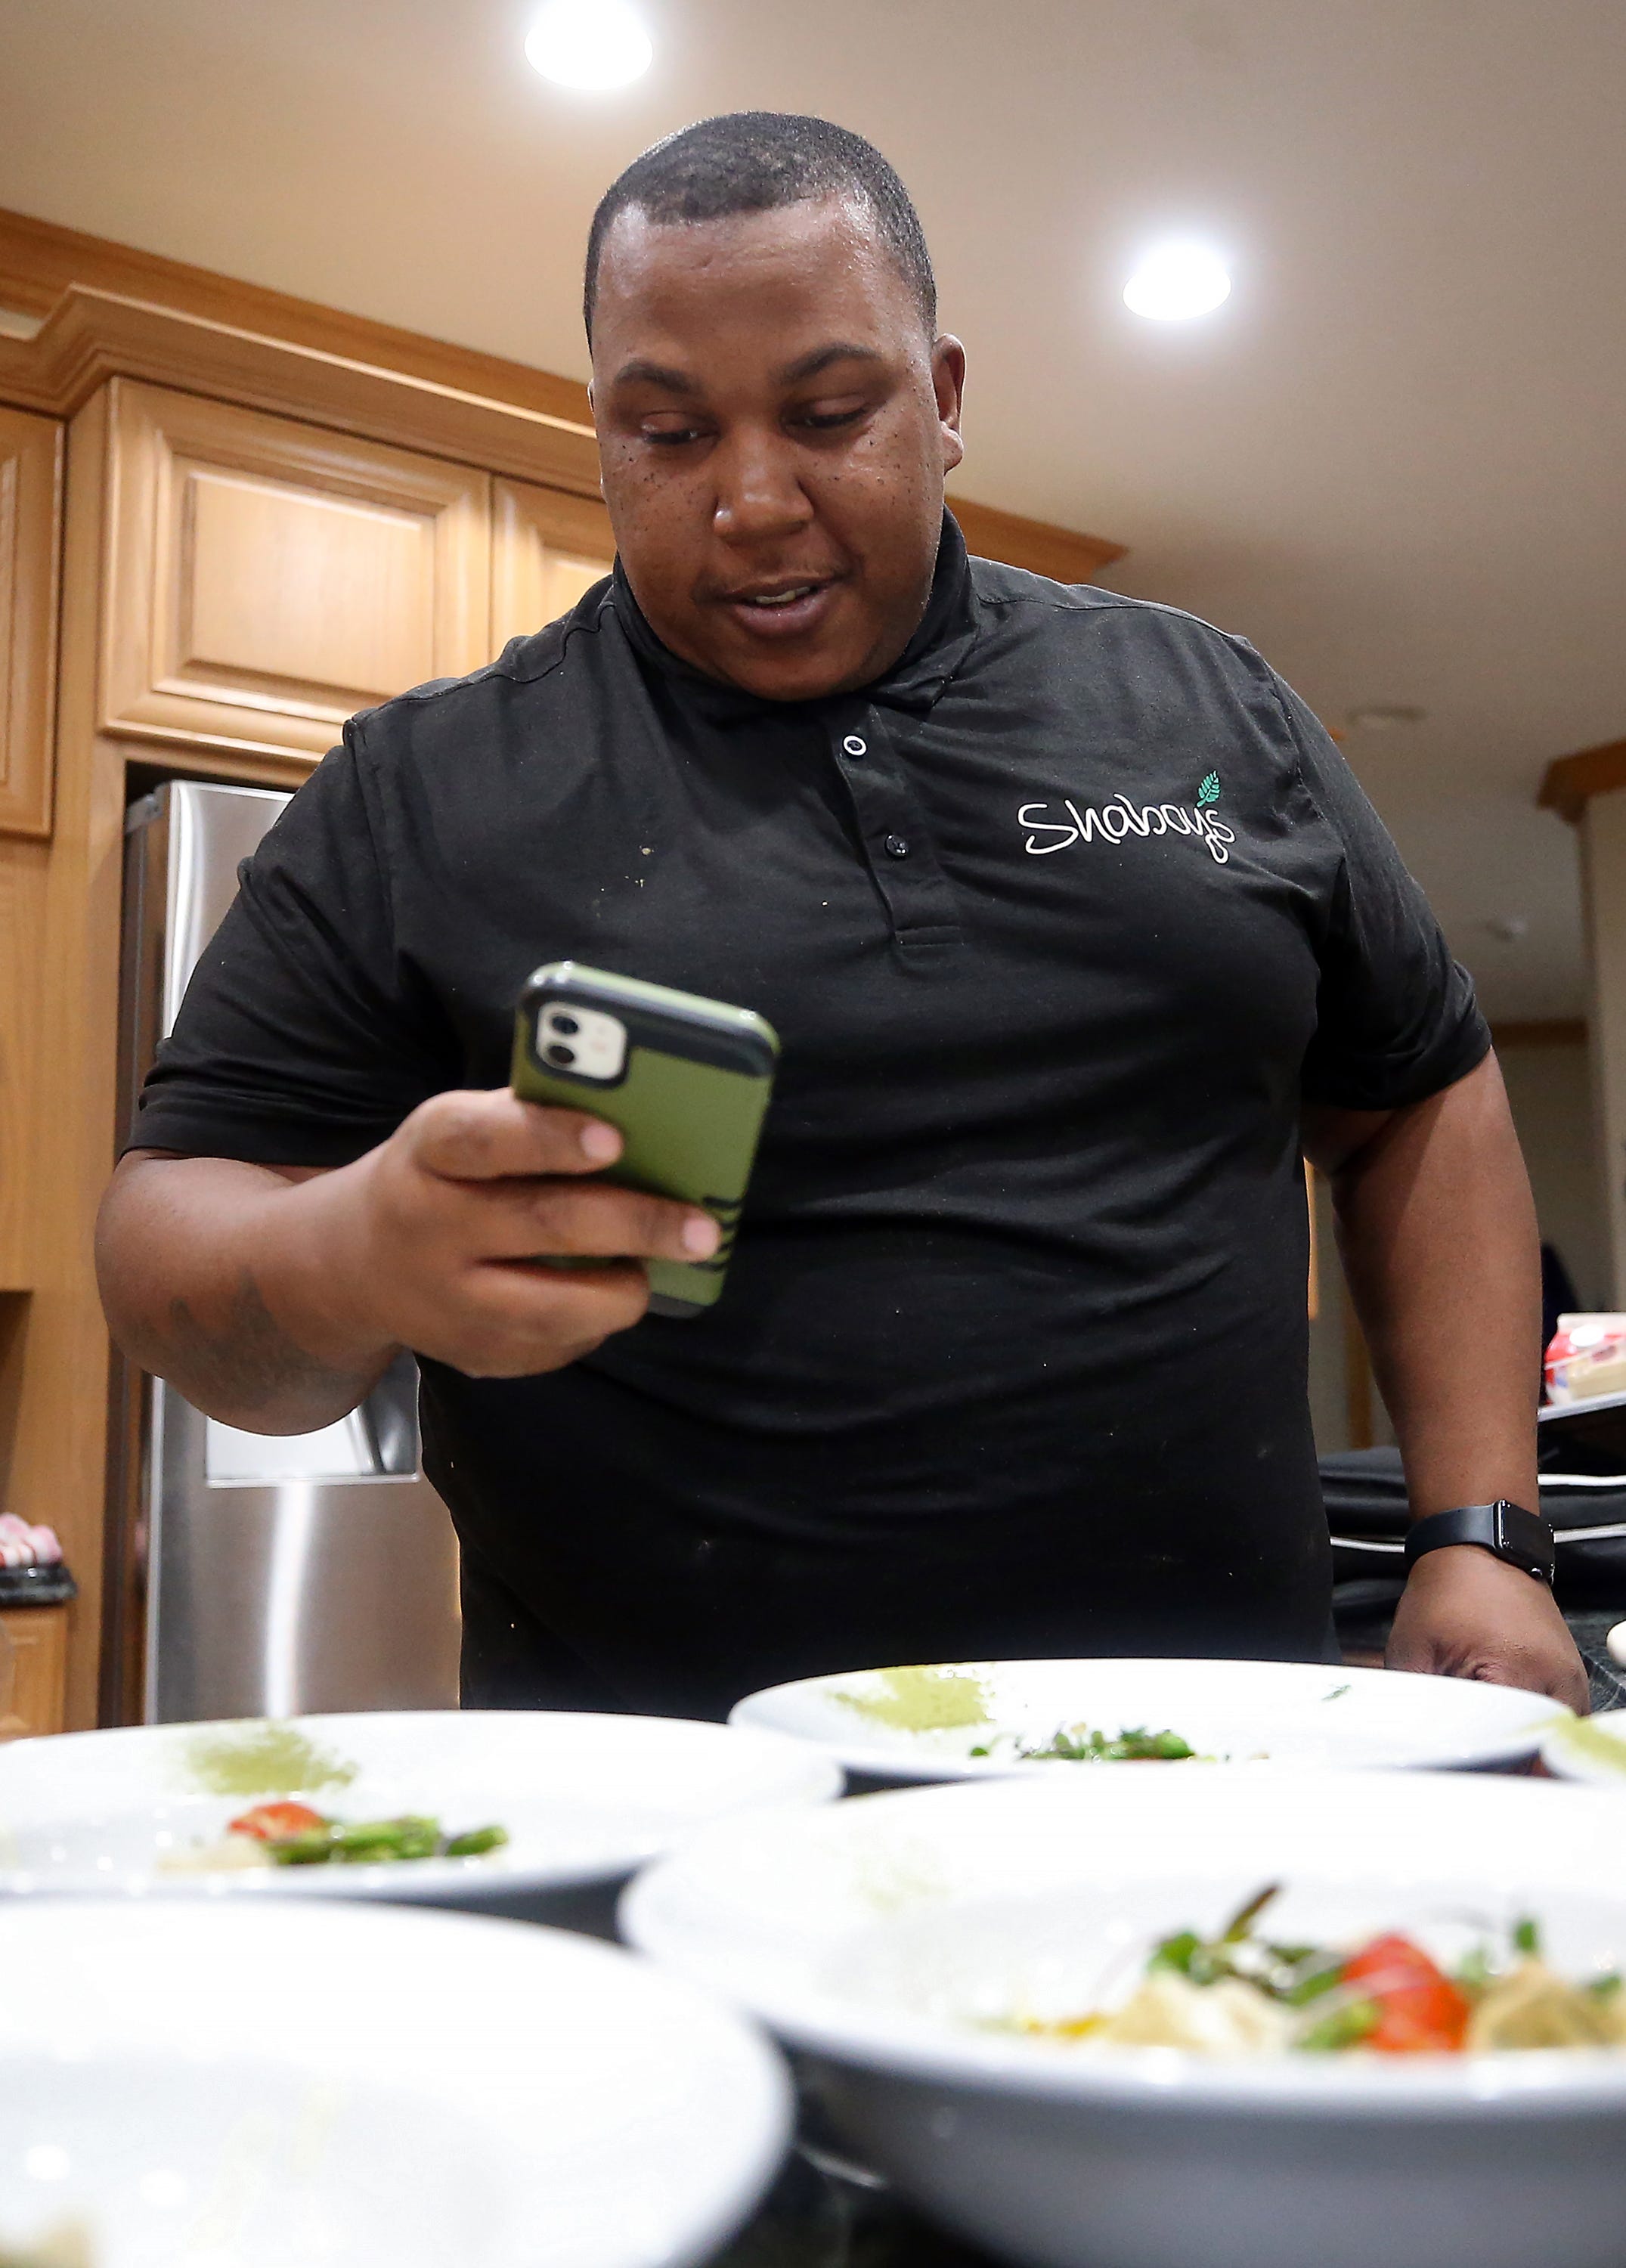 Private chef Dion Millender snaps a few photos of his dishes for his Instagram page @shaboys_akron before serving at a client's home, Sunday, Oct. 30, 2022, in Akron, Ohio.